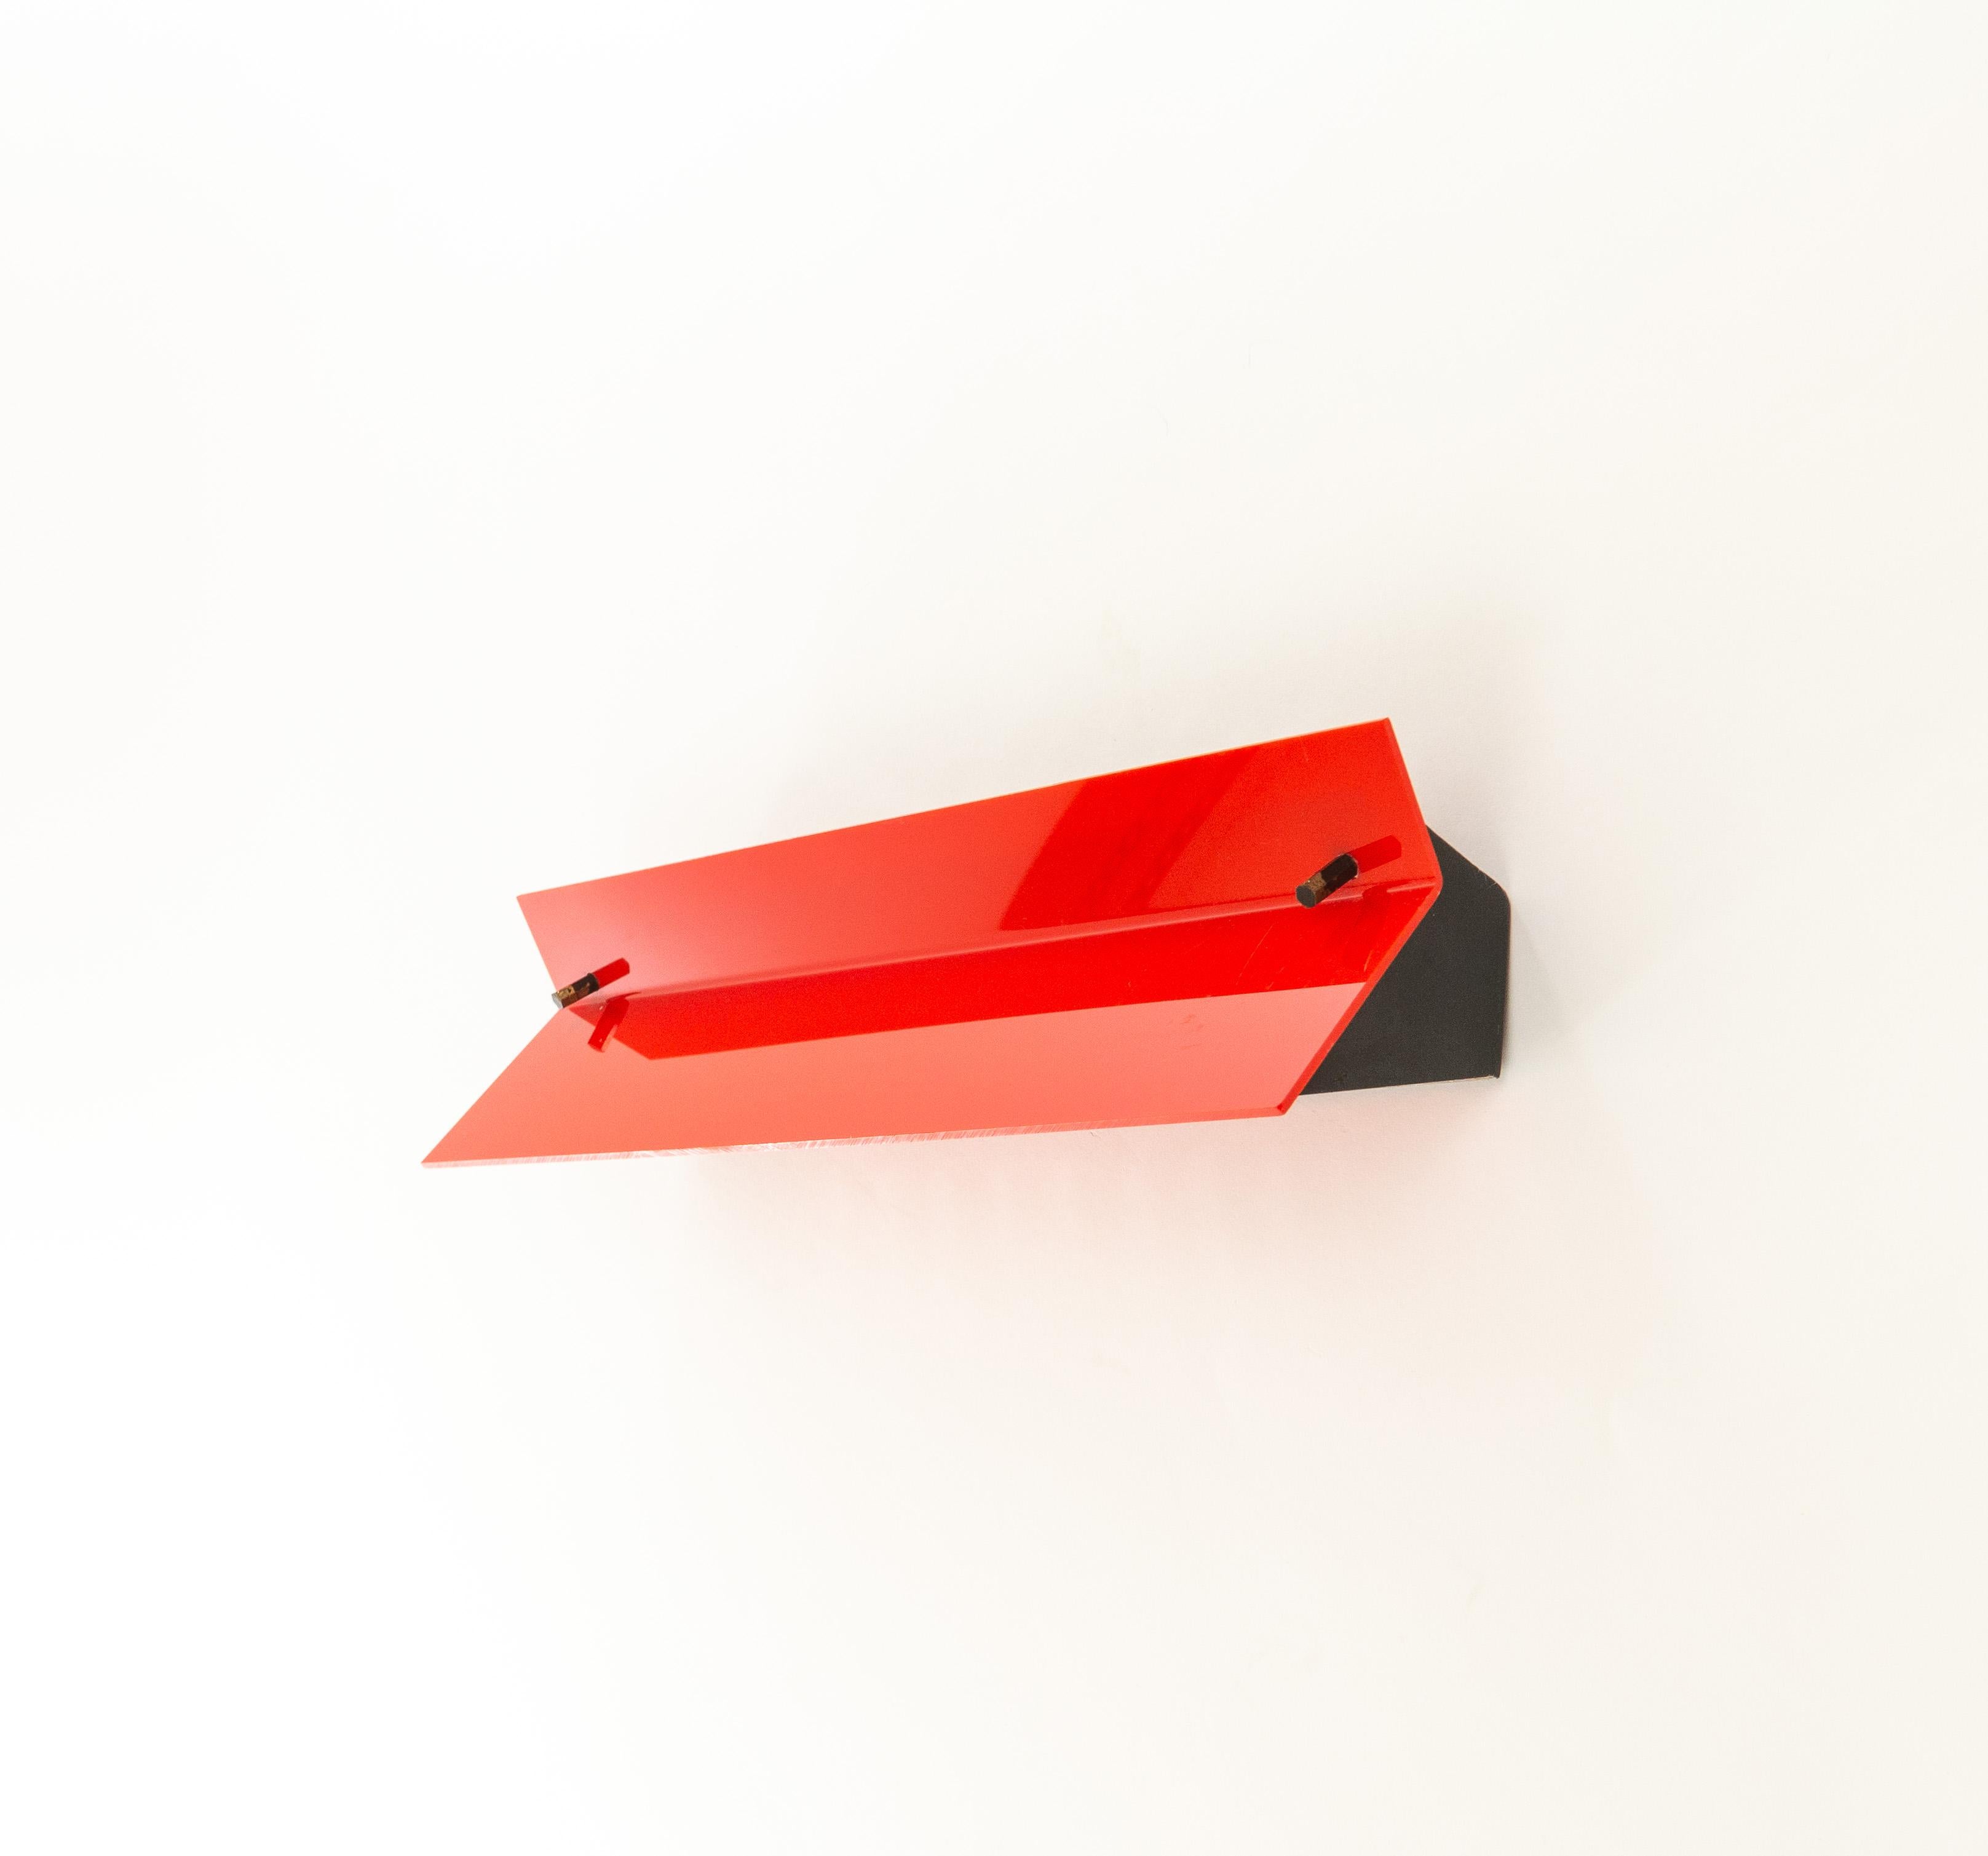 A red wall lamp by lighting manufacturer Stilnovo Milano, designed and produced in the 1960s.

The lamp consists of a lacquered metal structure, red colored plexiglass diffuser and brass and black details.

The Stilnovo label can be found on the